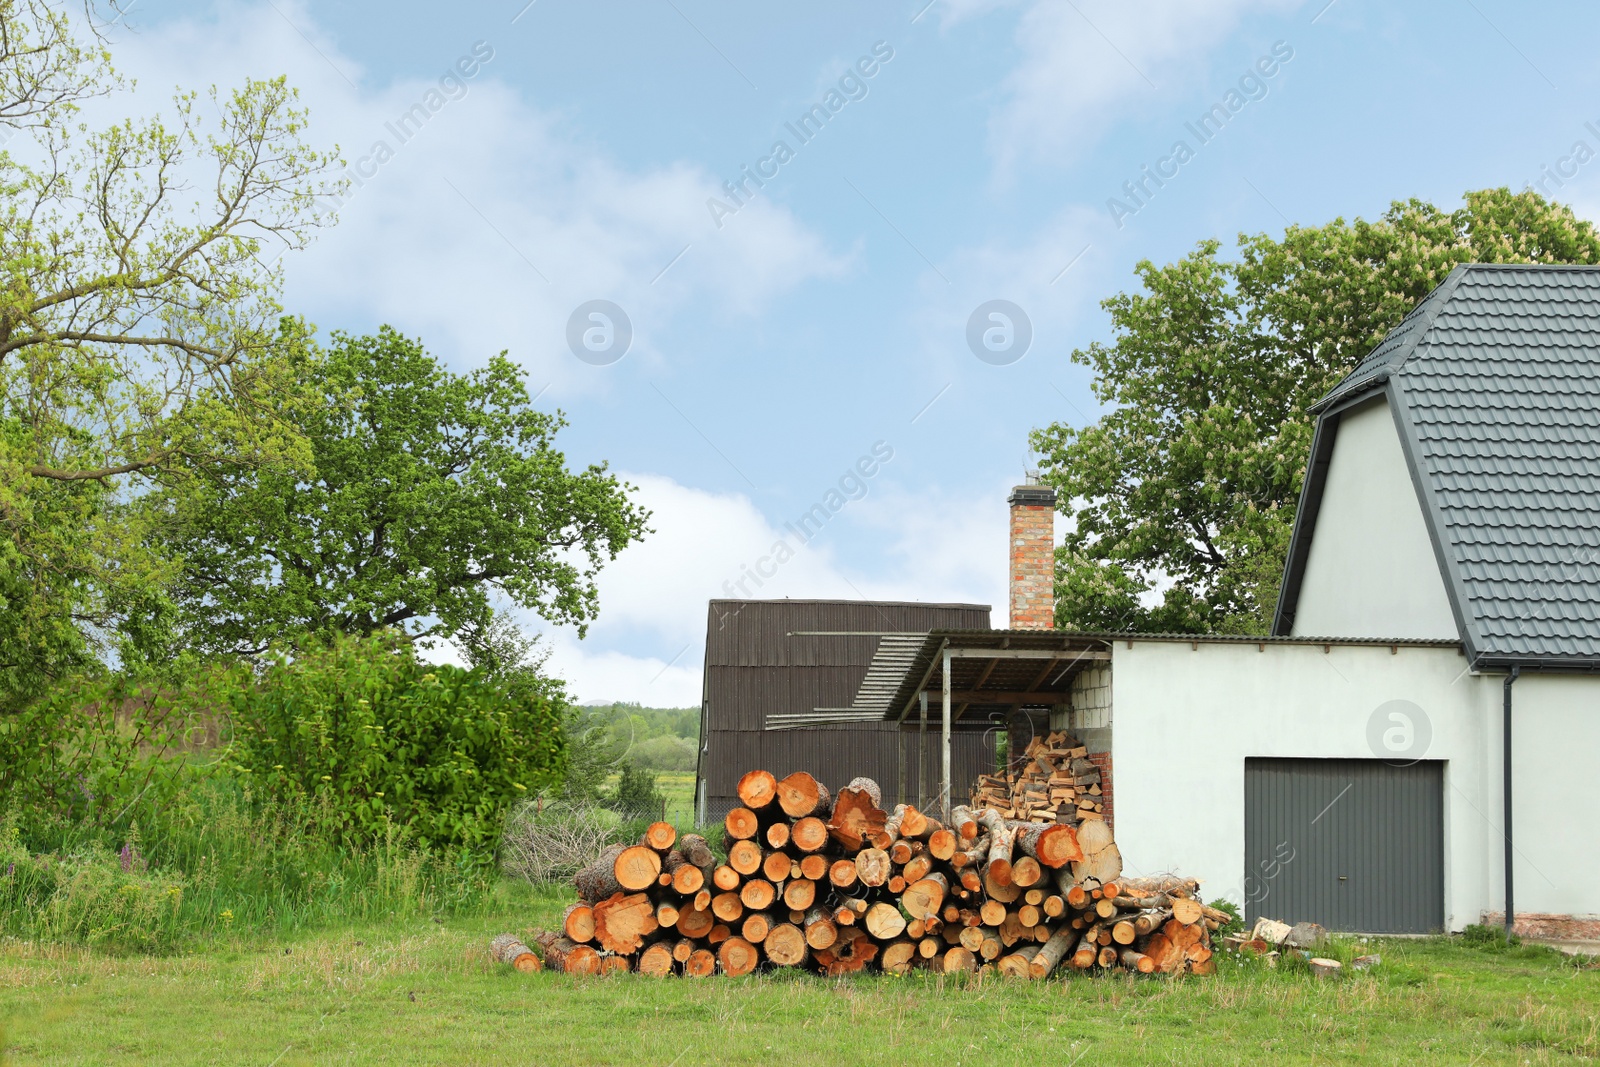 Photo of Pile of cut firewood near house on sunny day